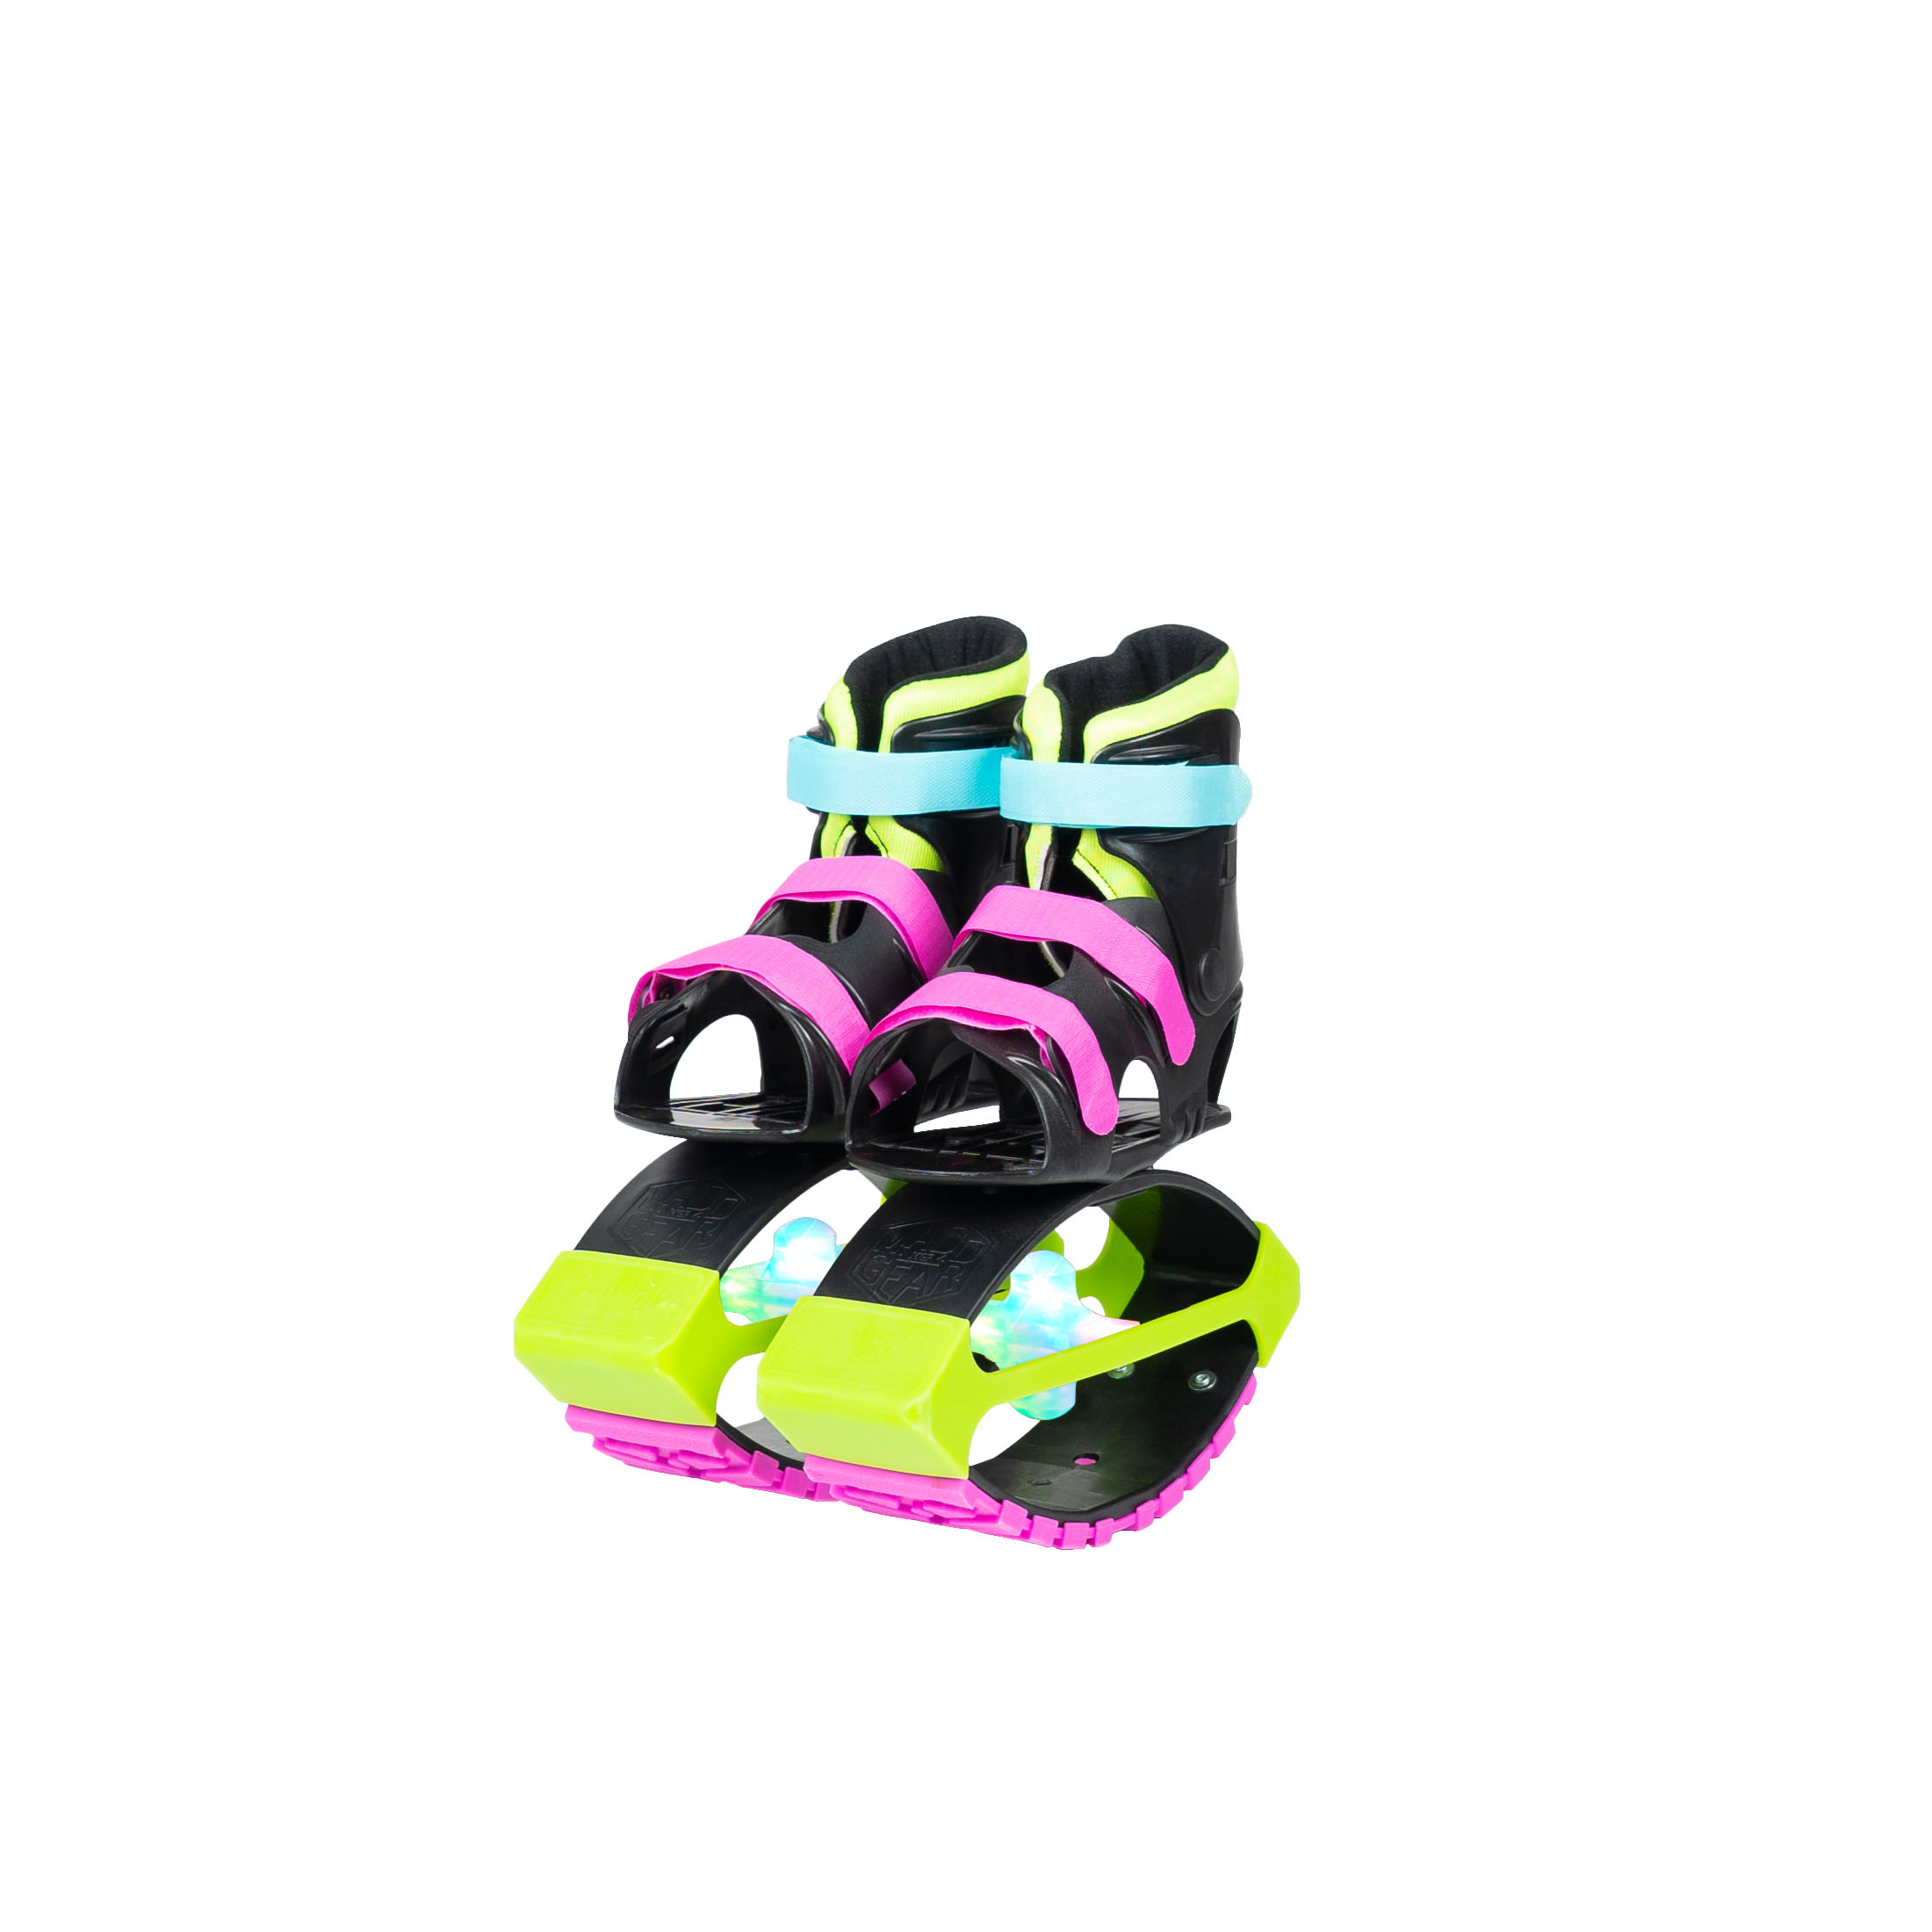 boost boots jumping shoes blue and green toy  moon boots jumping toy